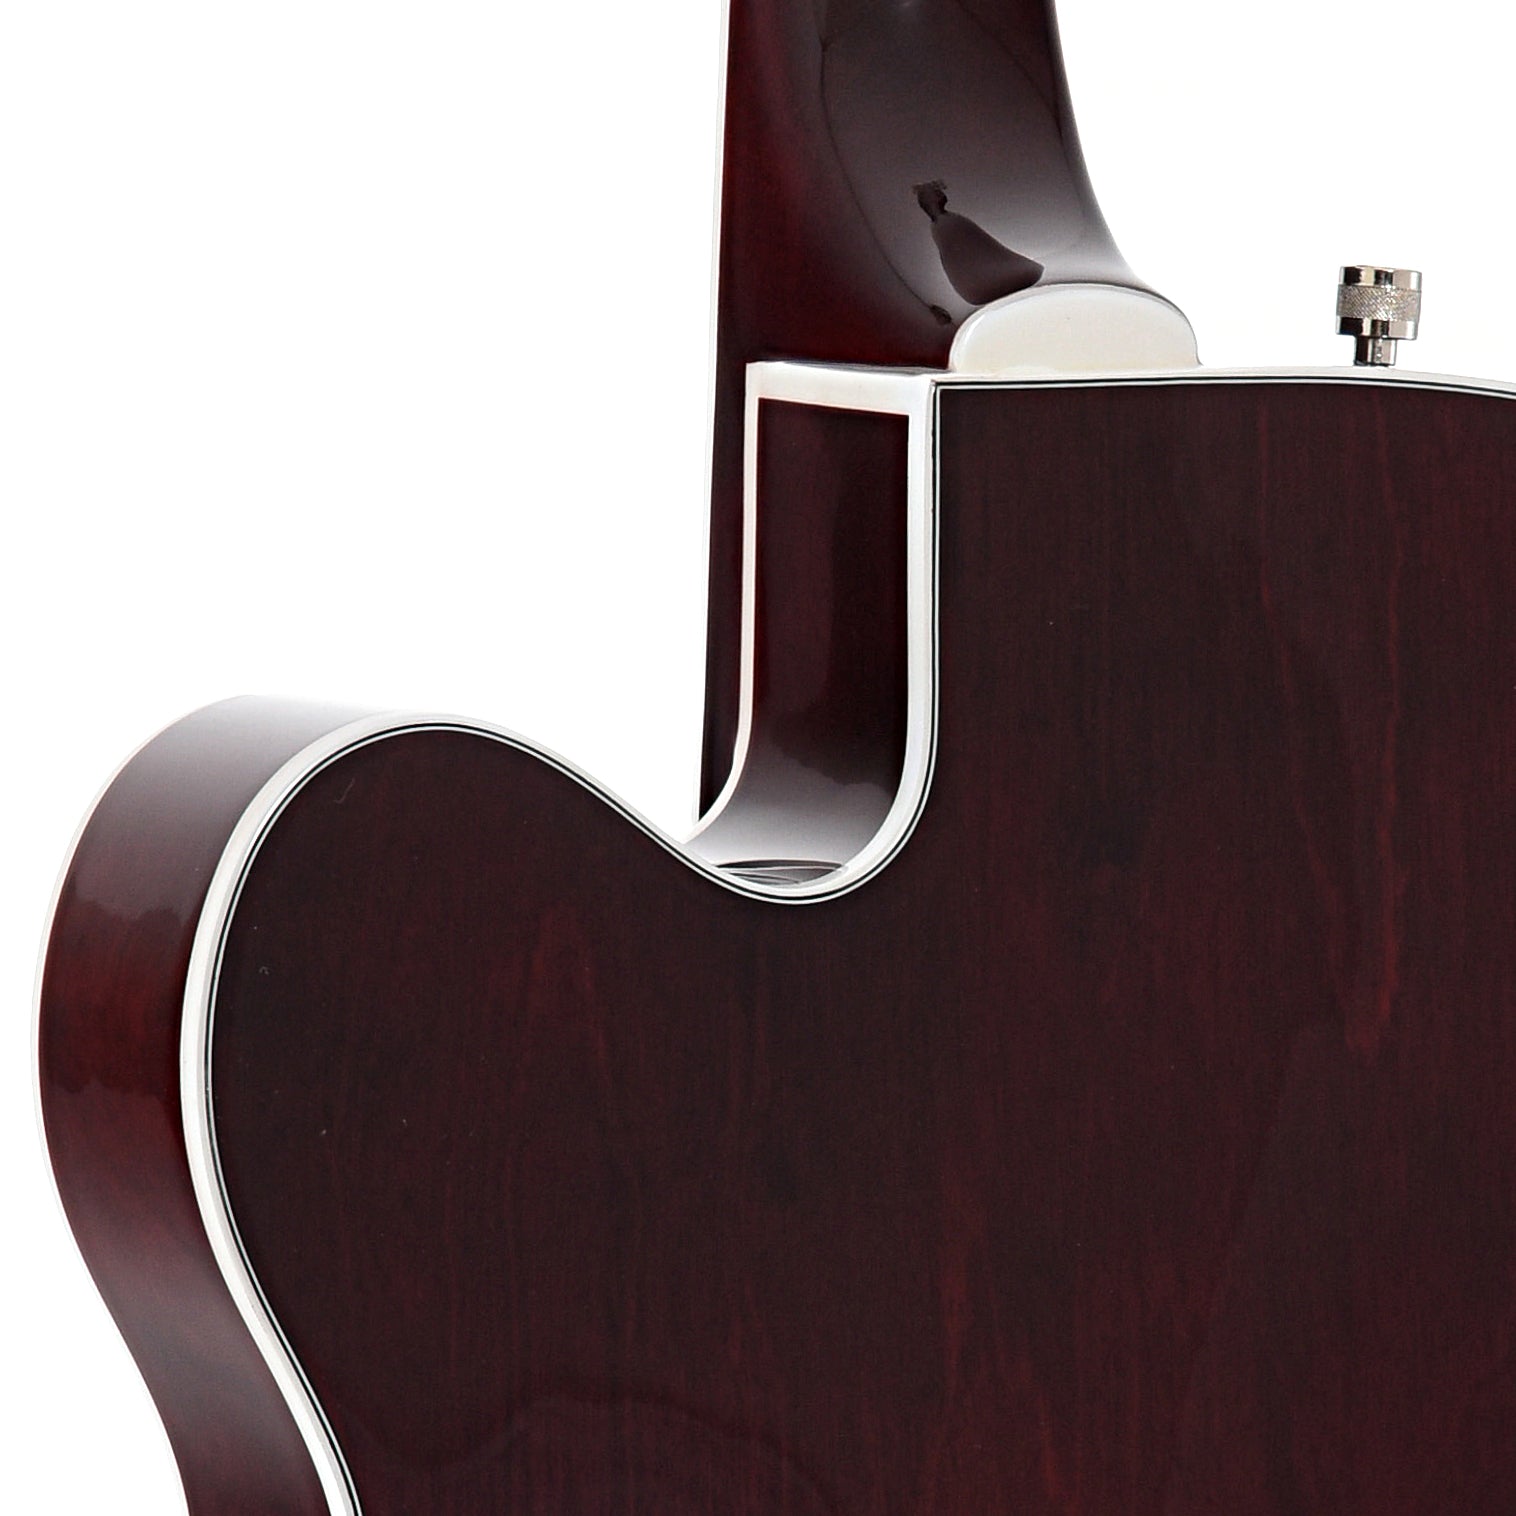 Image 9 of Gretsch G5420T Electromatic Classic Hollow Body Single Cut with Bigbsy, Walnut Stain- SKU# G5420T-WLNT : Product Type Hollow Body Electric Guitars : Elderly Instruments